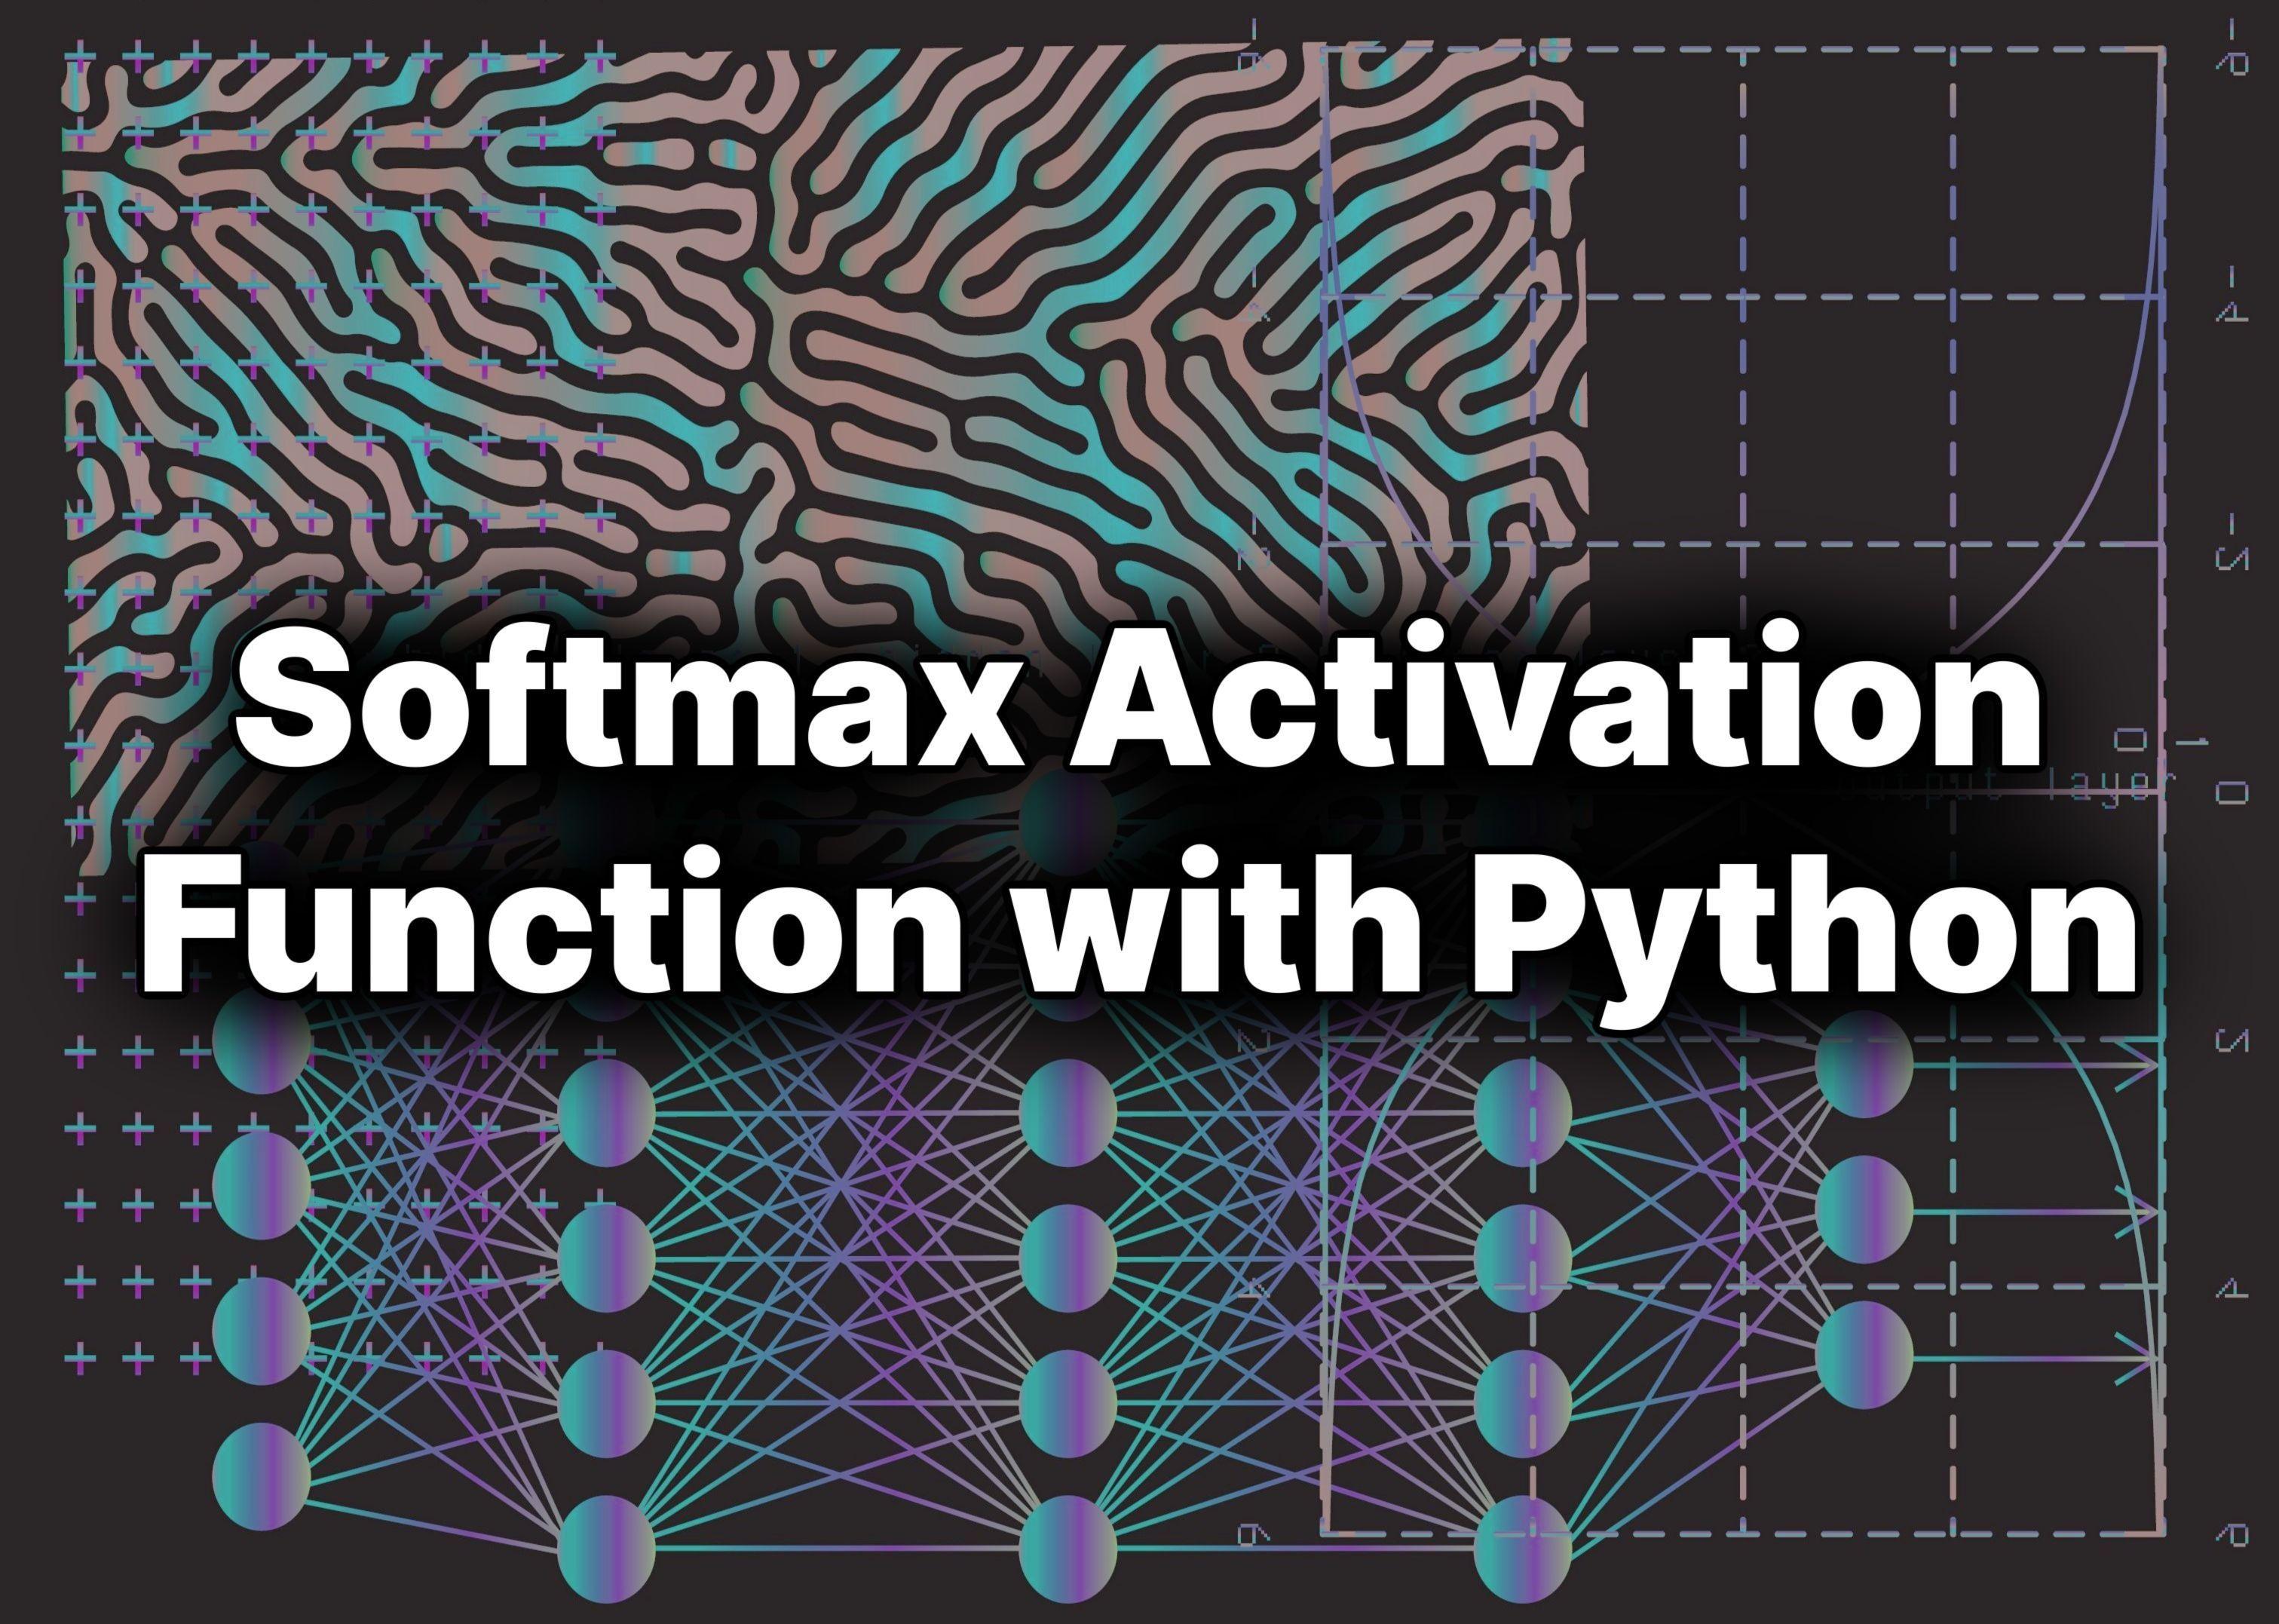 Softmax activation function with Python.